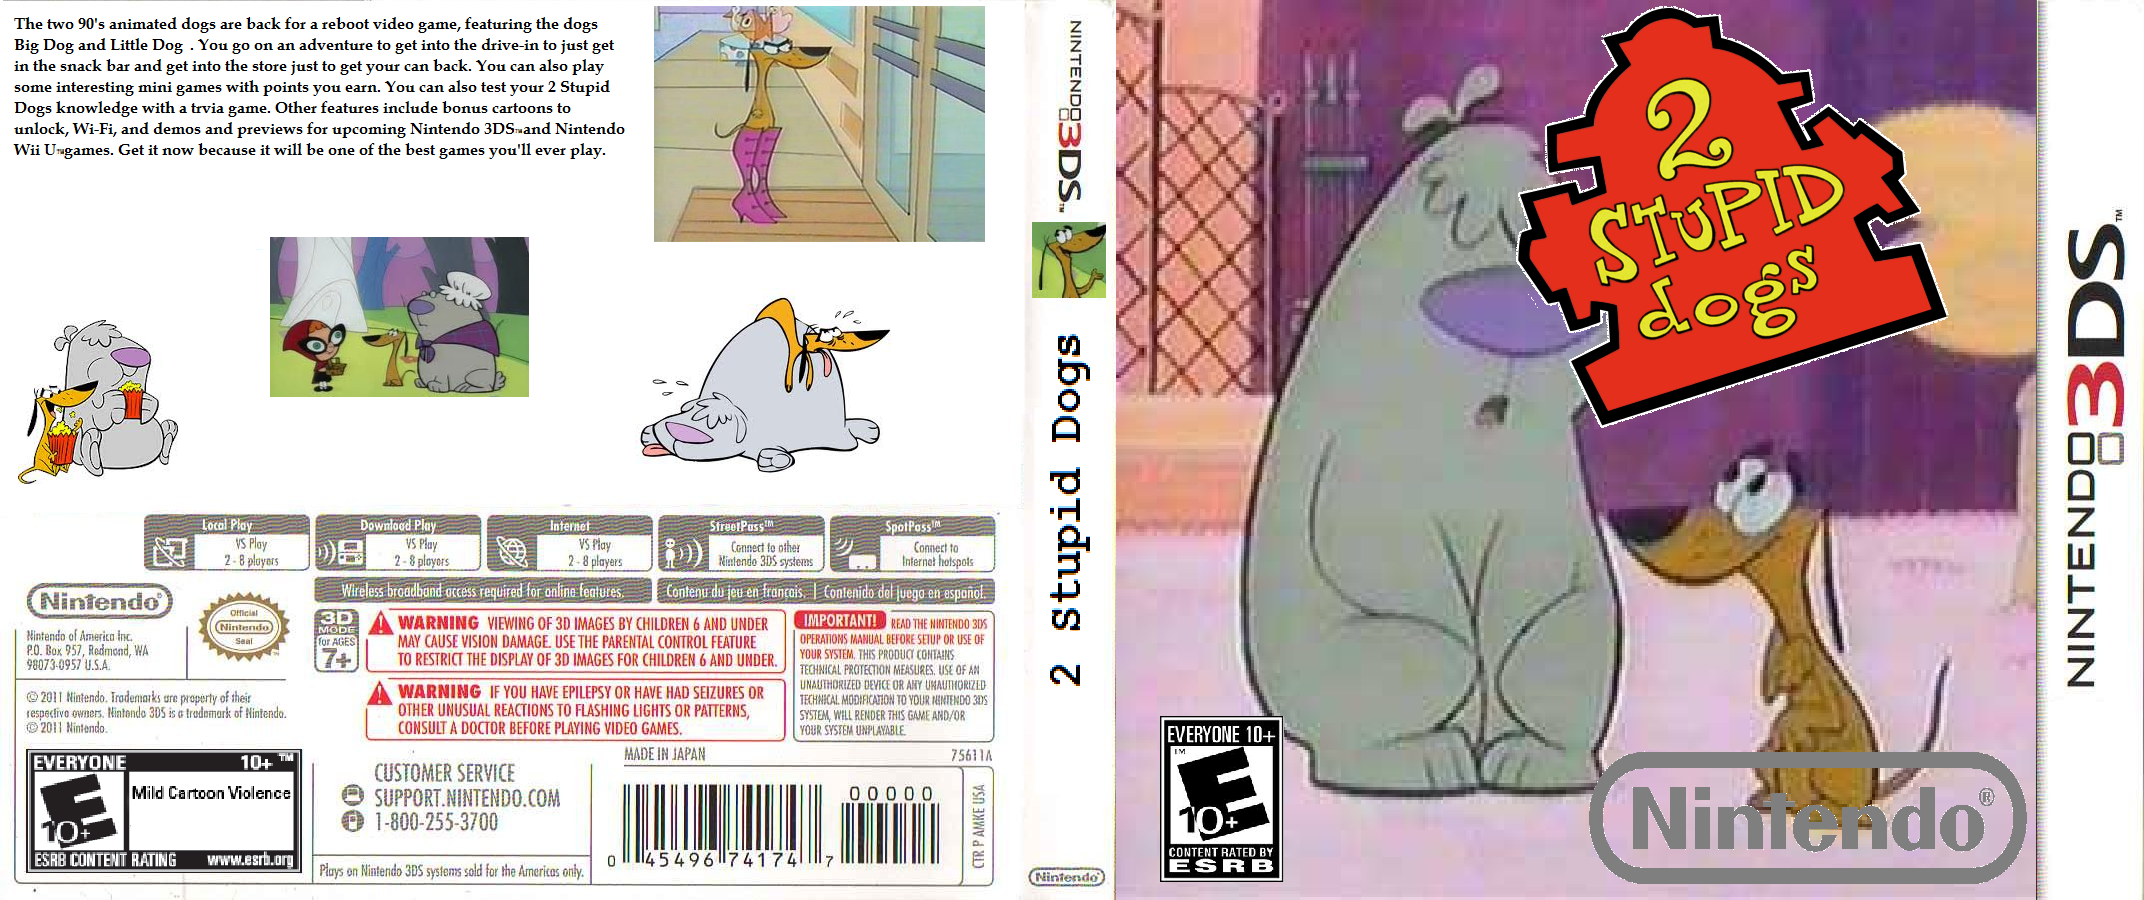 Two Stupid Dogs box cover